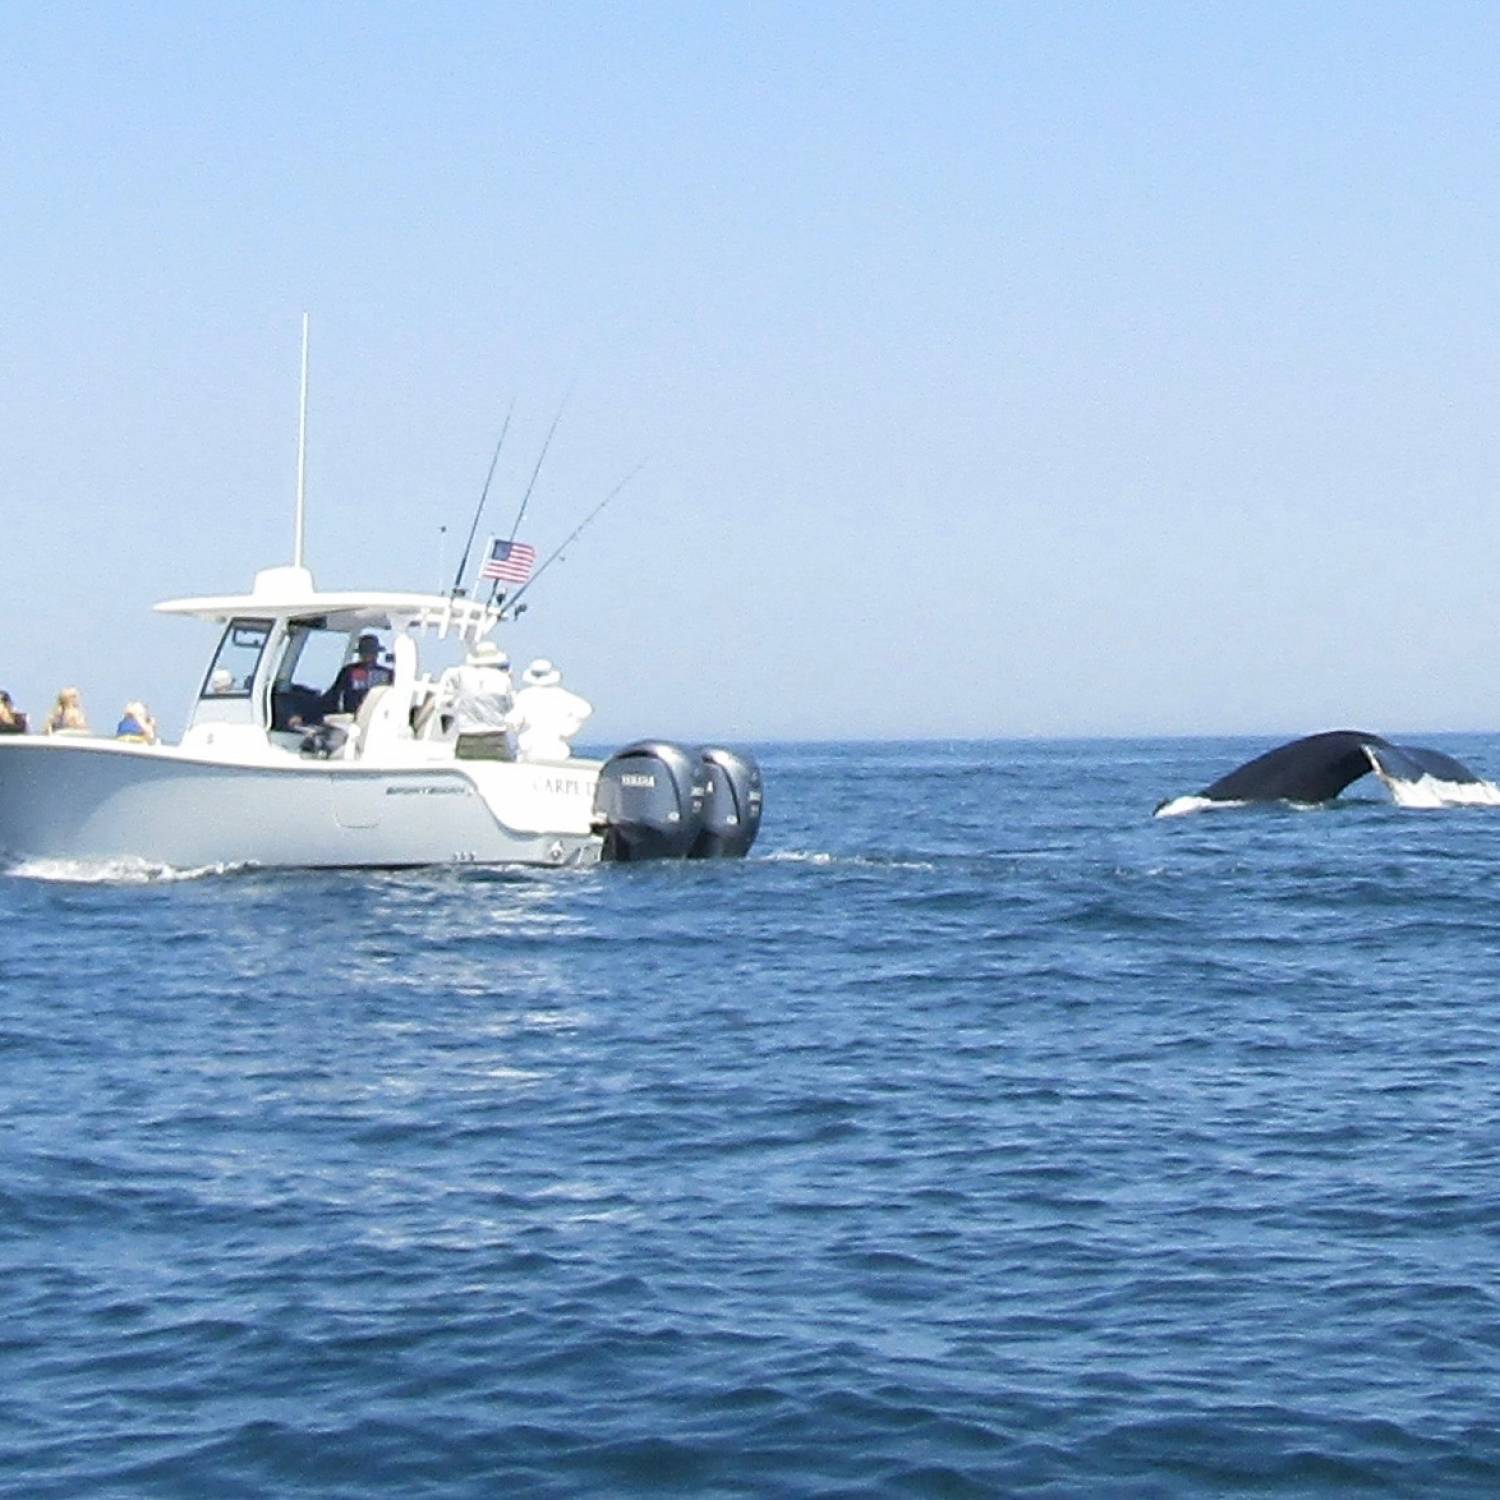 Title: Whale Encounter - On board their Sportsman Open 282 Center Console - Location: Jeffreys Ledge off Gloucester, MA. Participating in the Photo Contest #SportsmanOctober